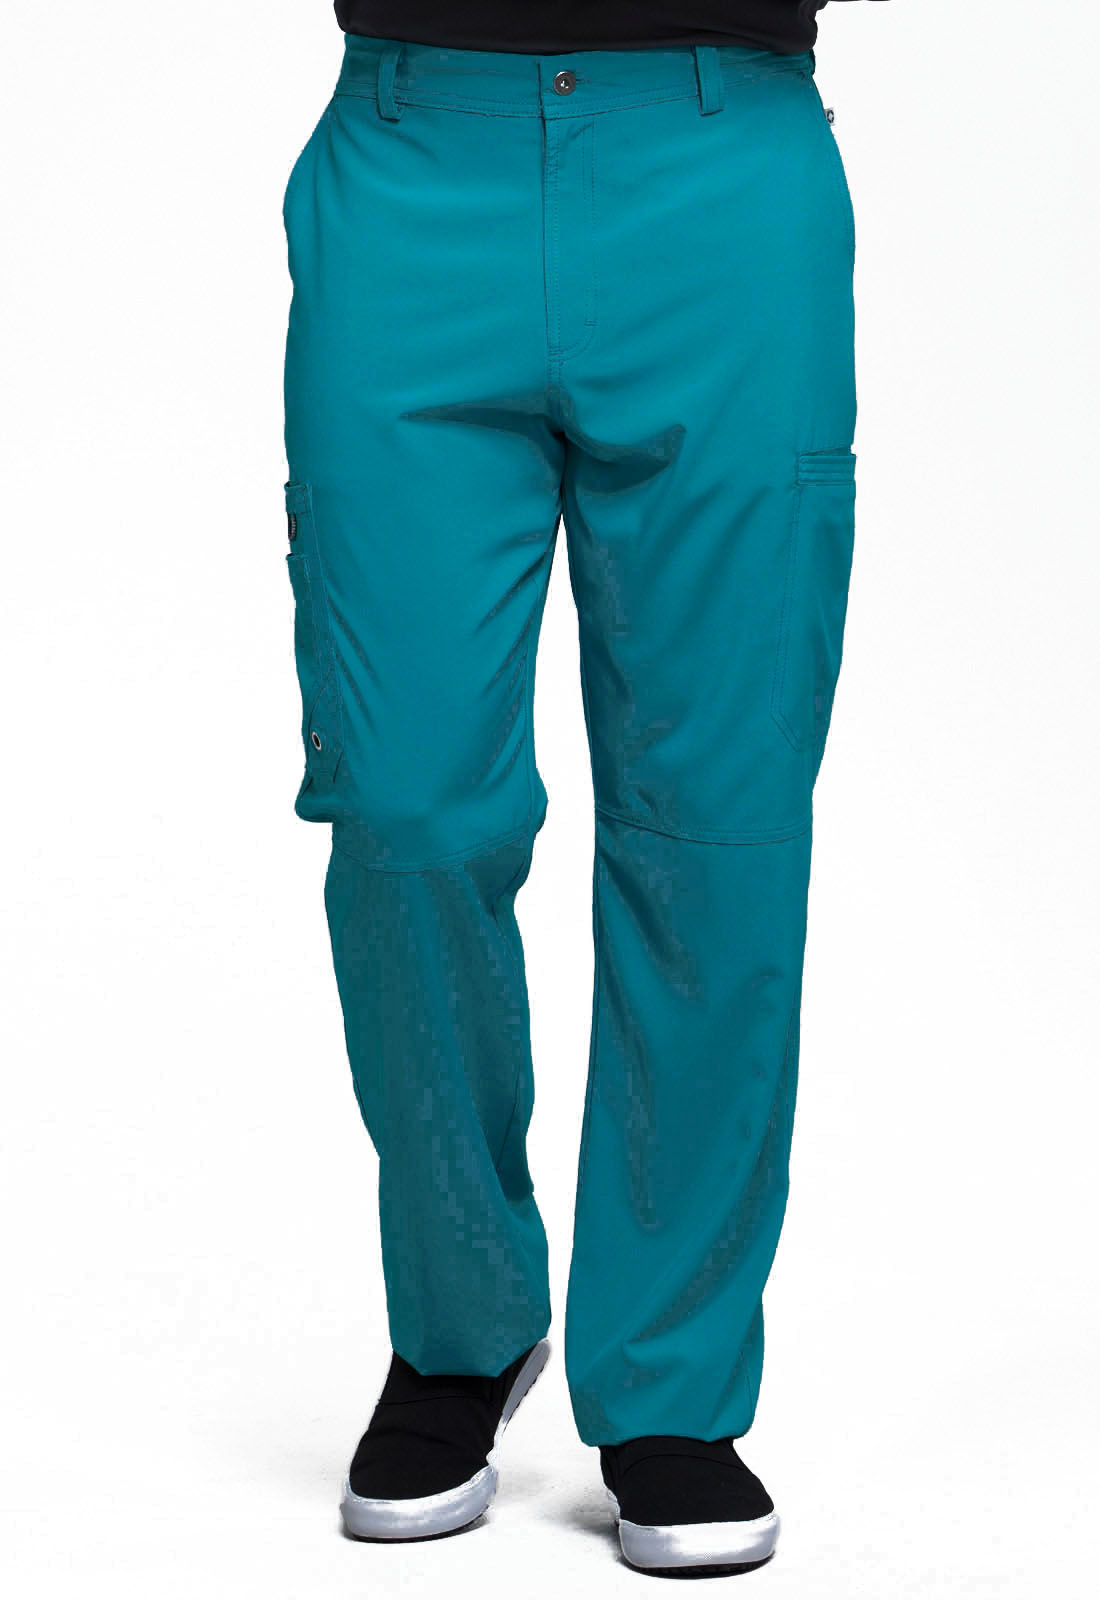 Cherokee Men's Fly Front Pant - CK200AS